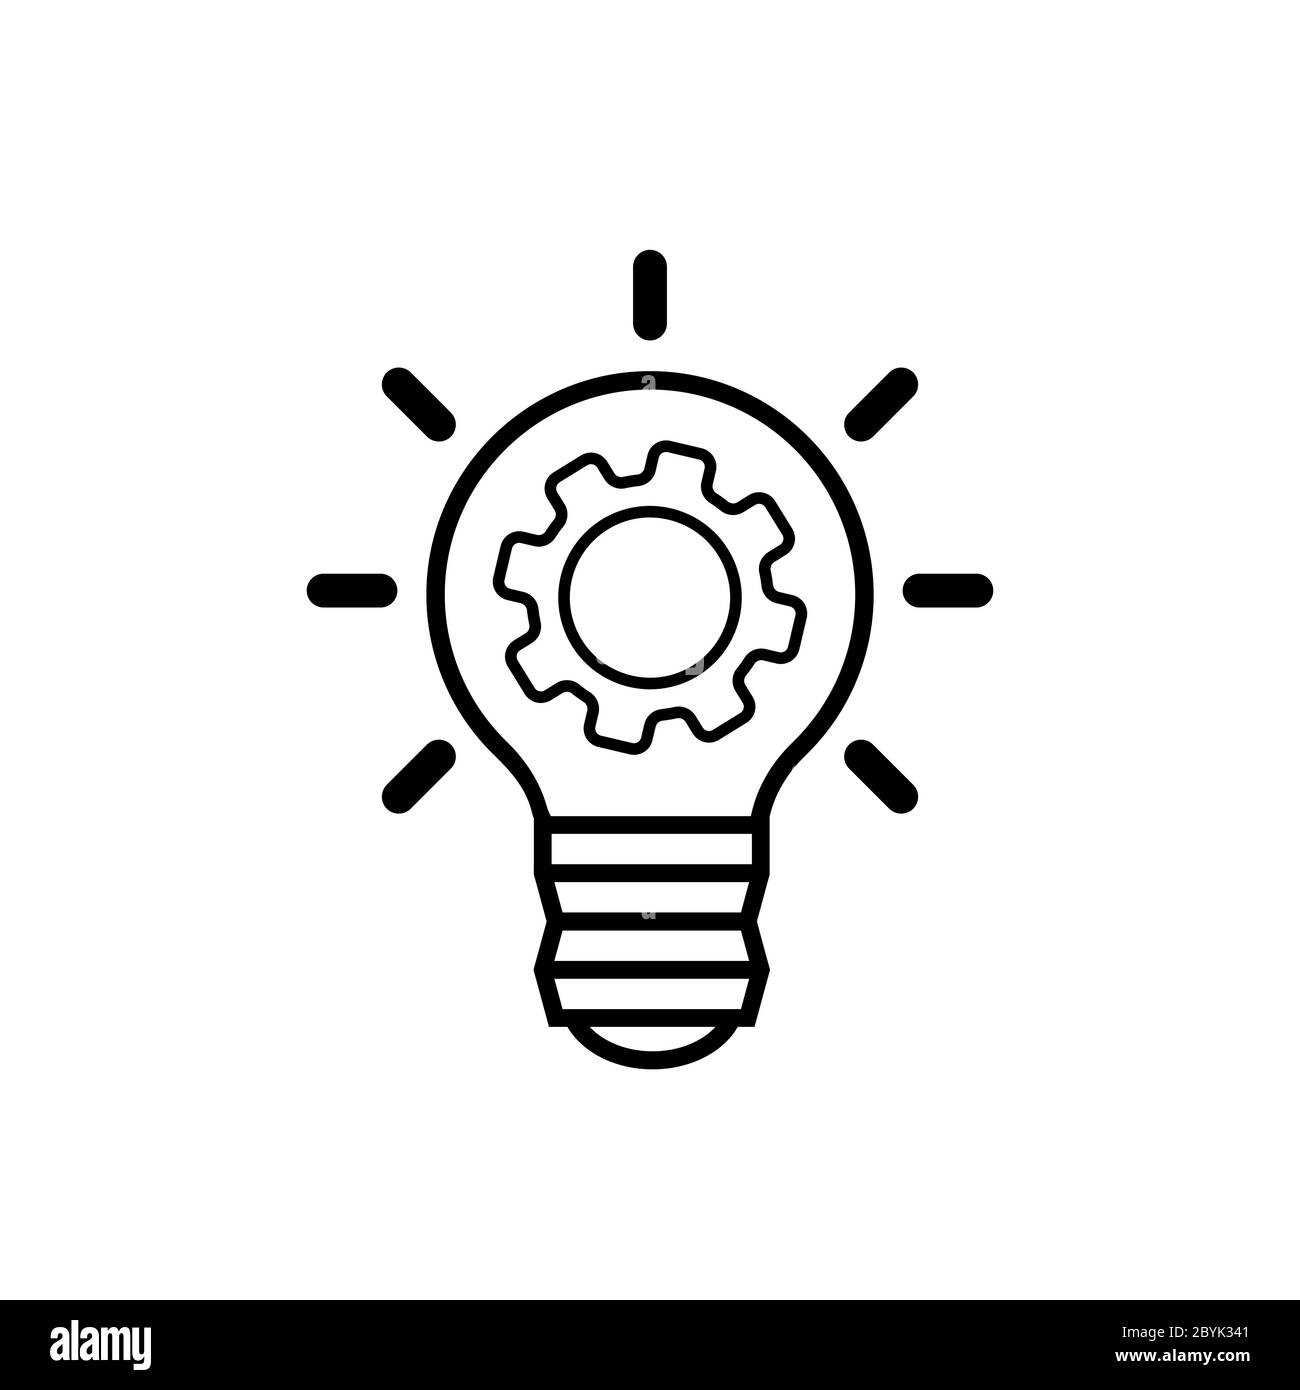 Light bulb idea icon with gears inside in black on an isolated white background. Business concept. EPS 10 vector Stock Vector